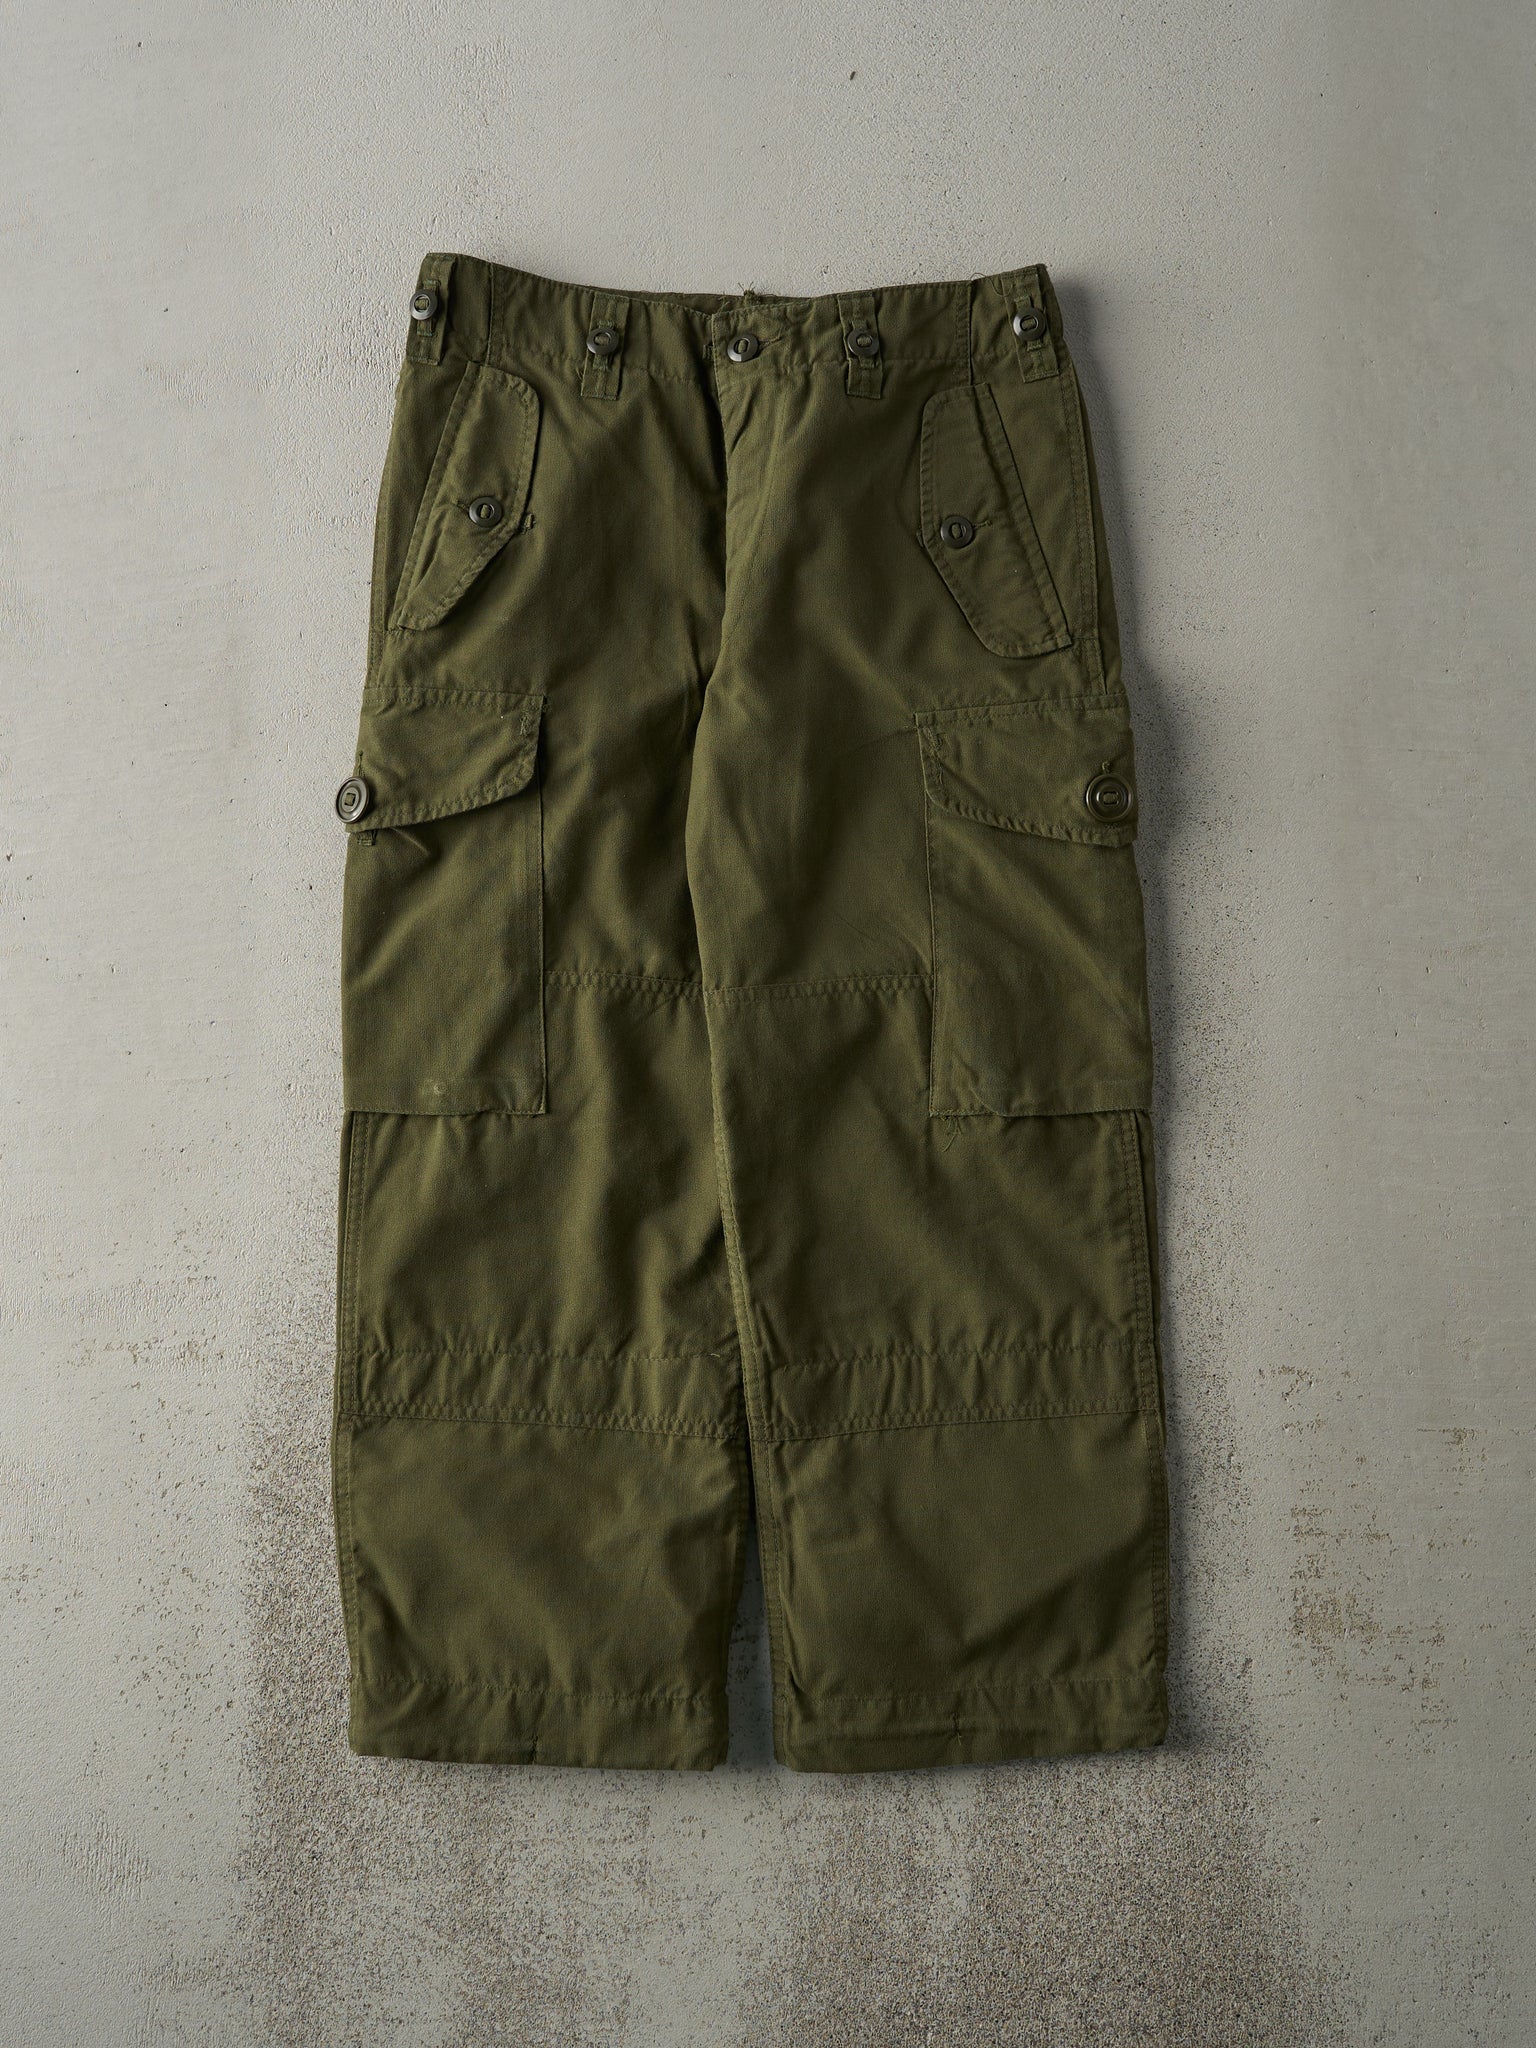 Vintage 87' Army Green Combat Trouser MKIII Military Pants (30x25)